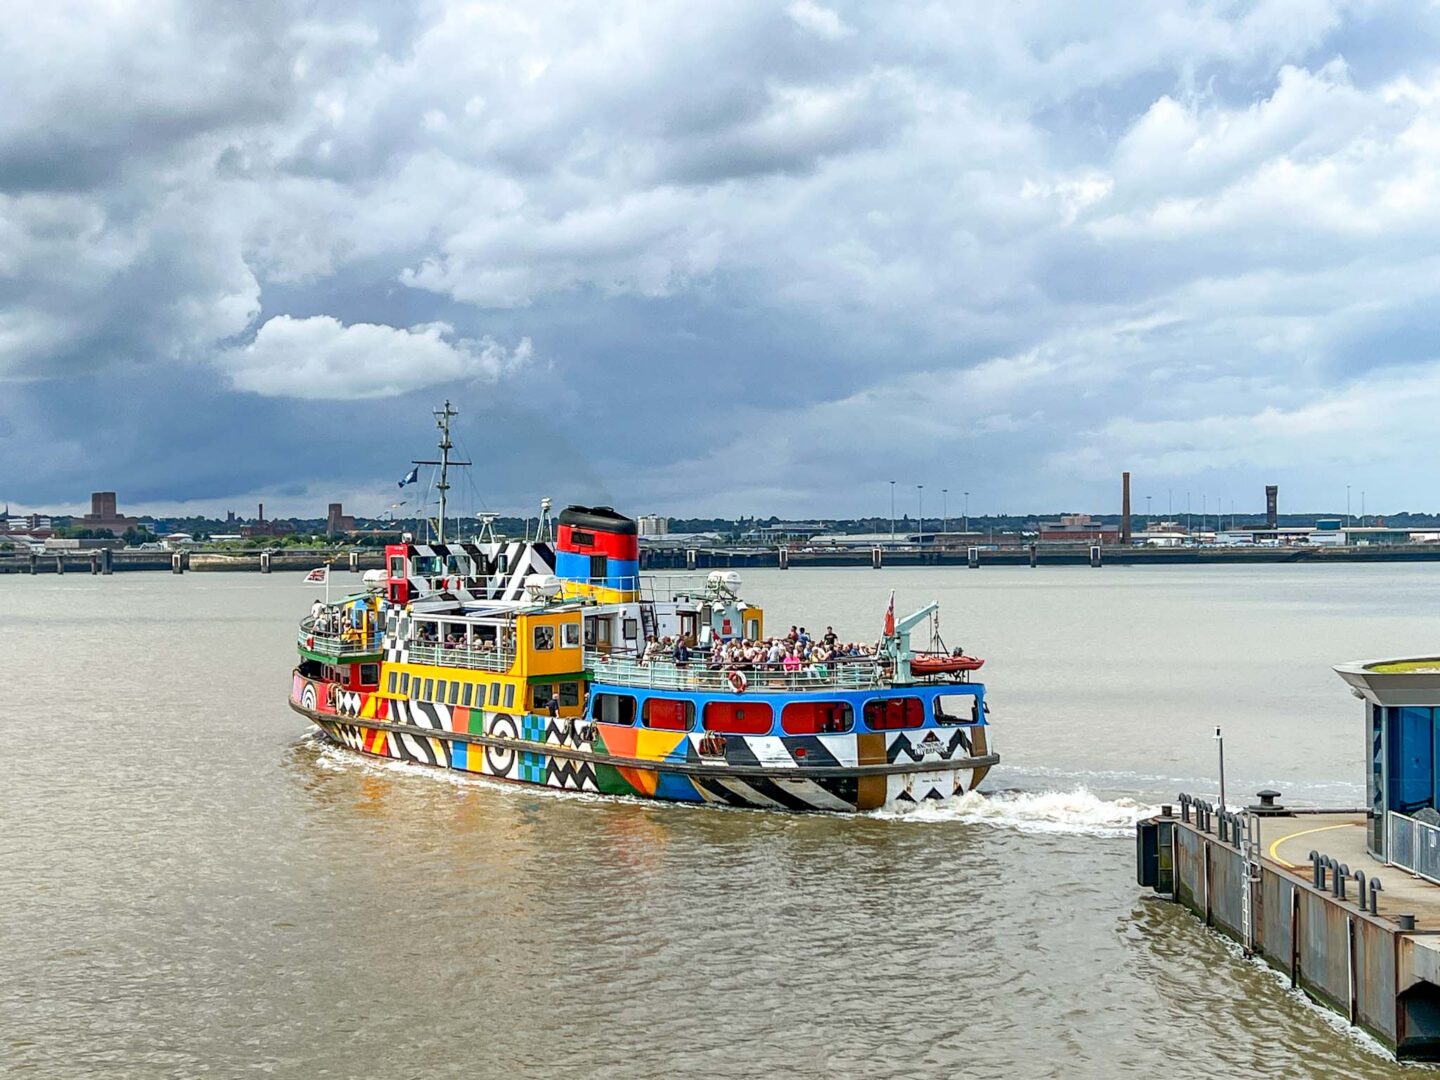 One day in Liverpool, Mersey Ferry on the water